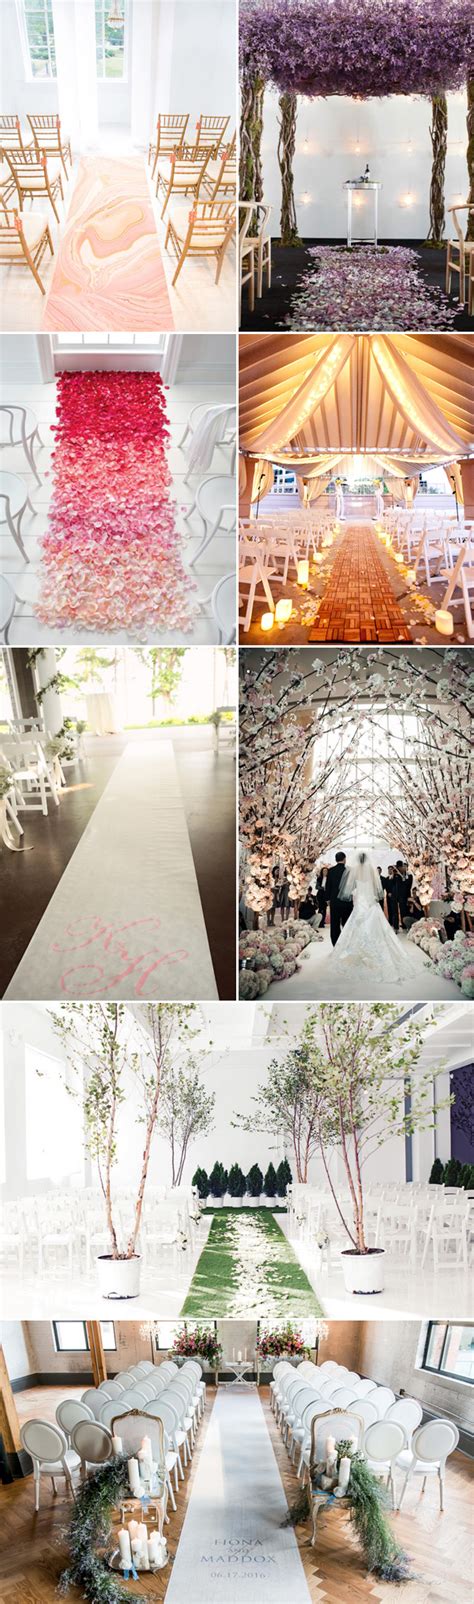 25 Wedding Aisle Runner Ideas For Your Big Day Deer Pearl Flowers